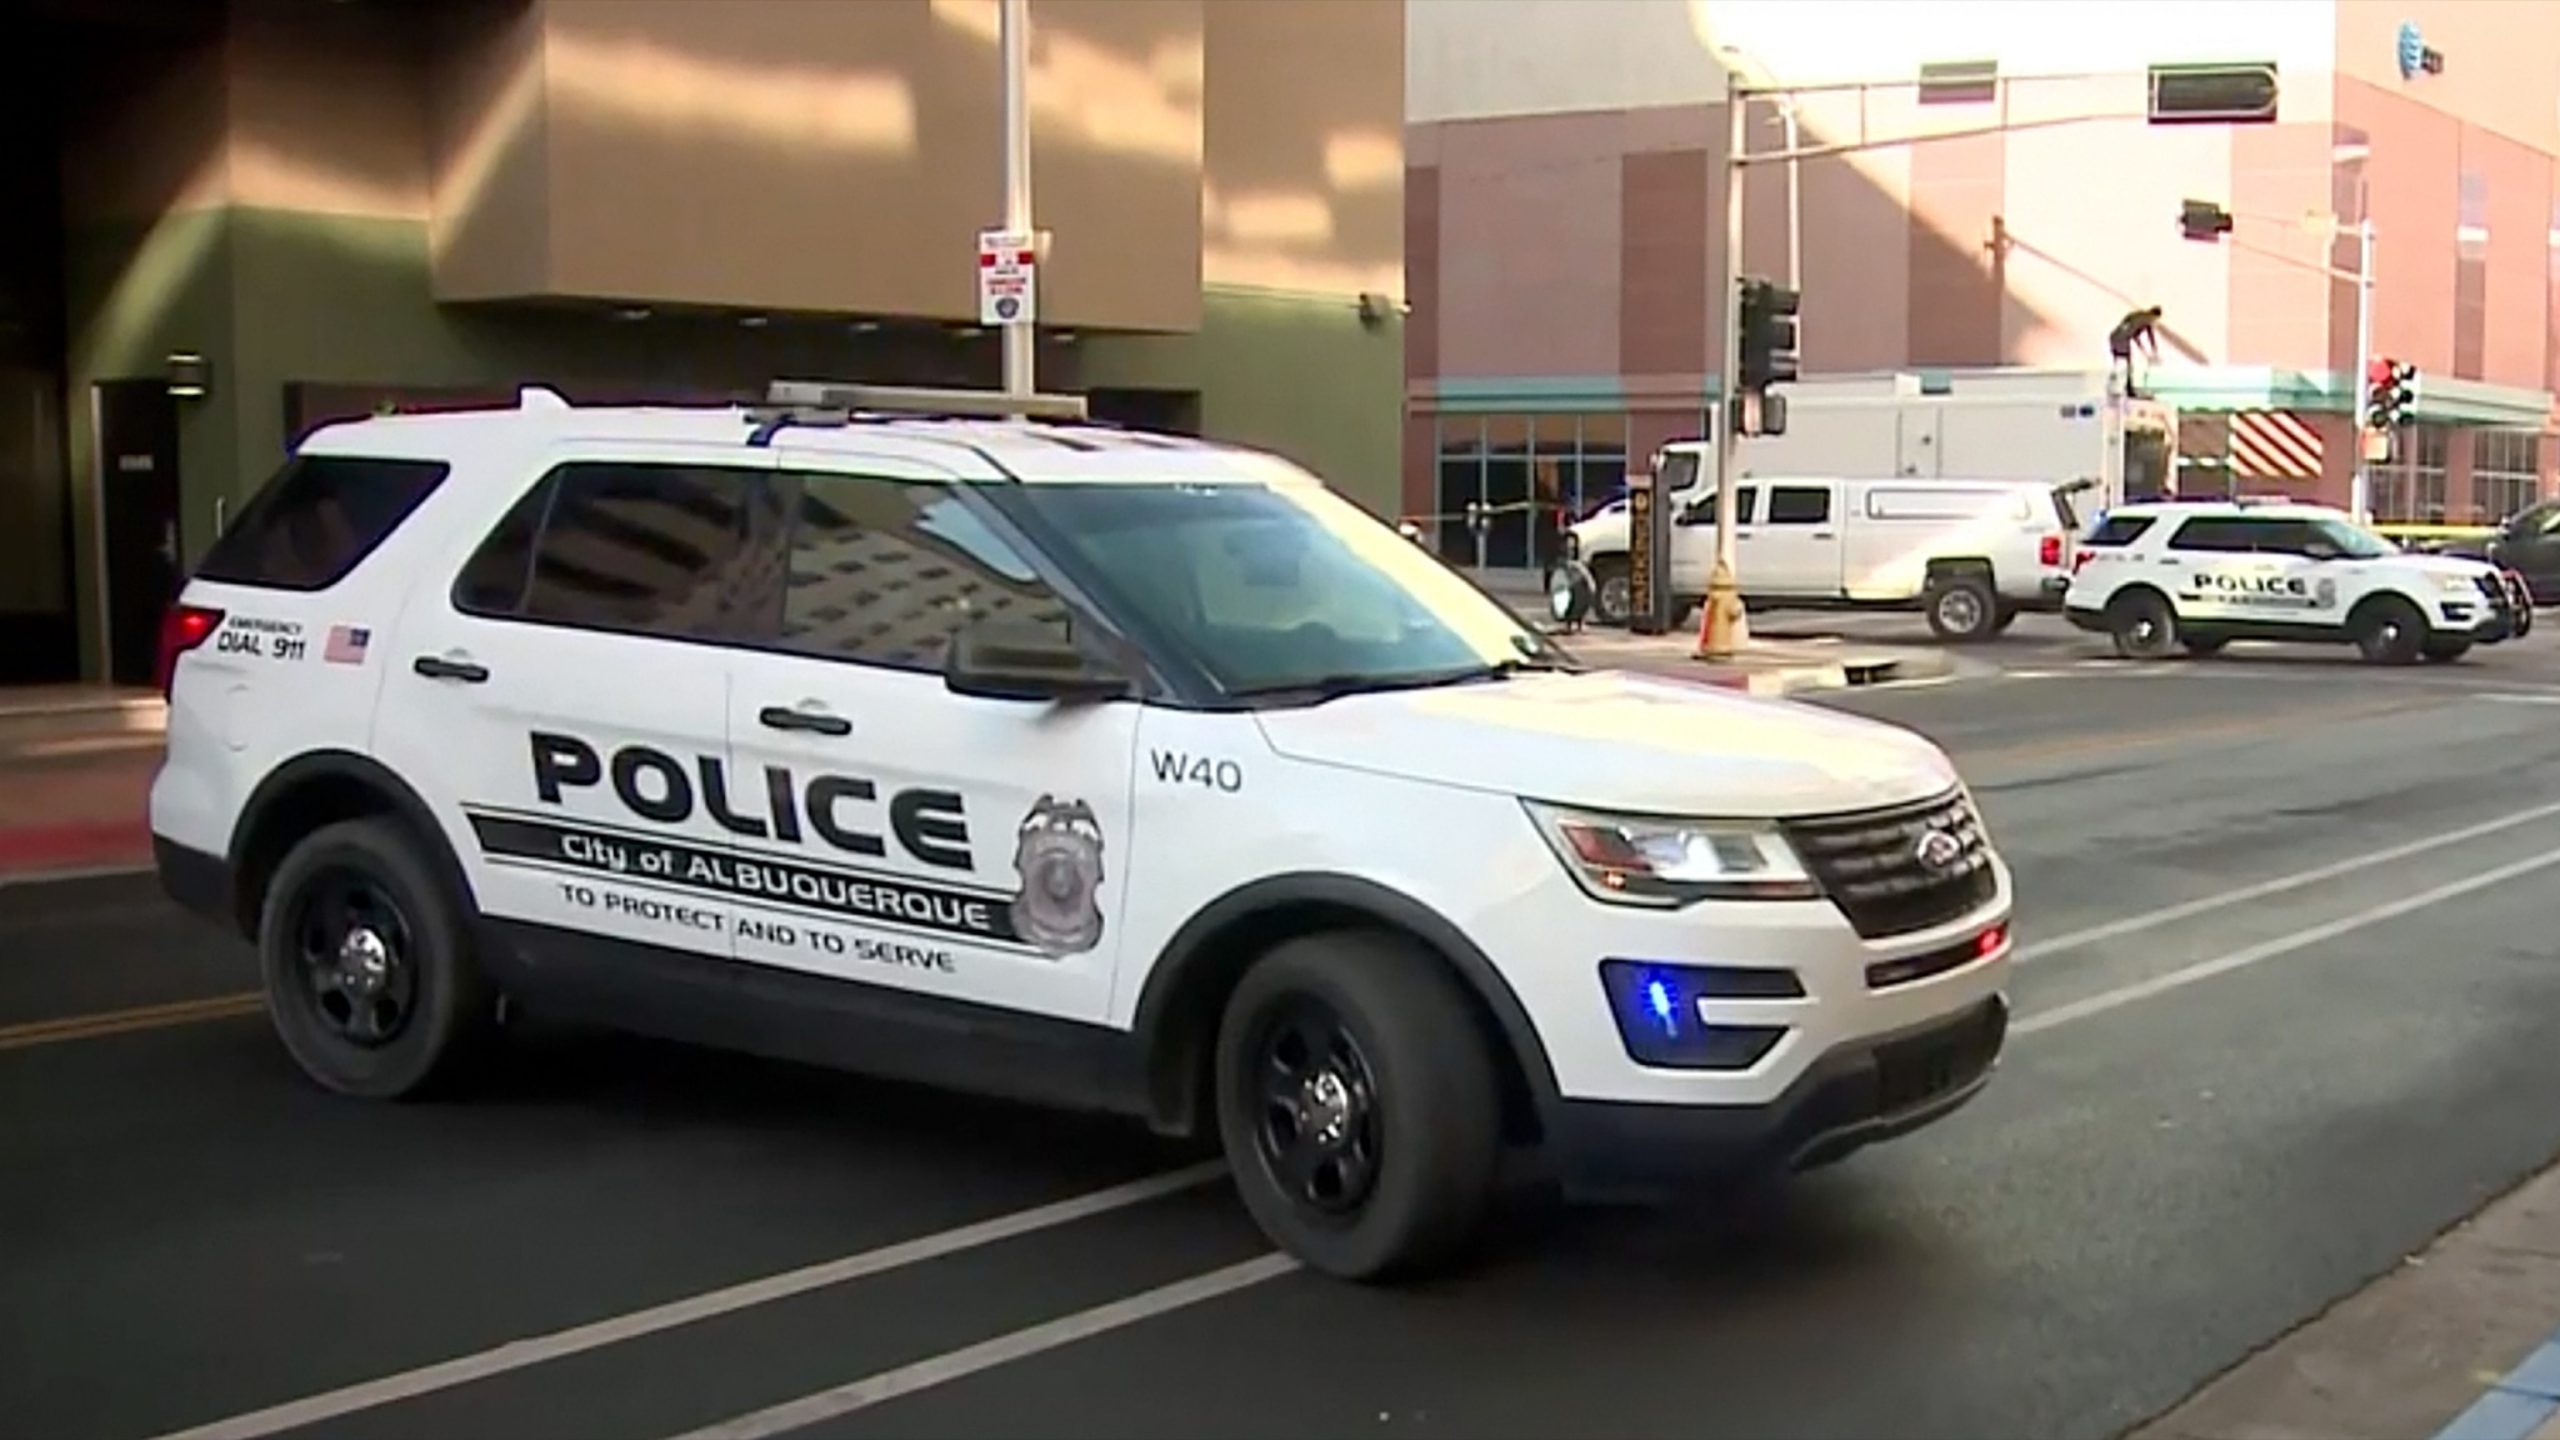 Police report discovery of explosive device outside courthouse in Deming, New Mexico